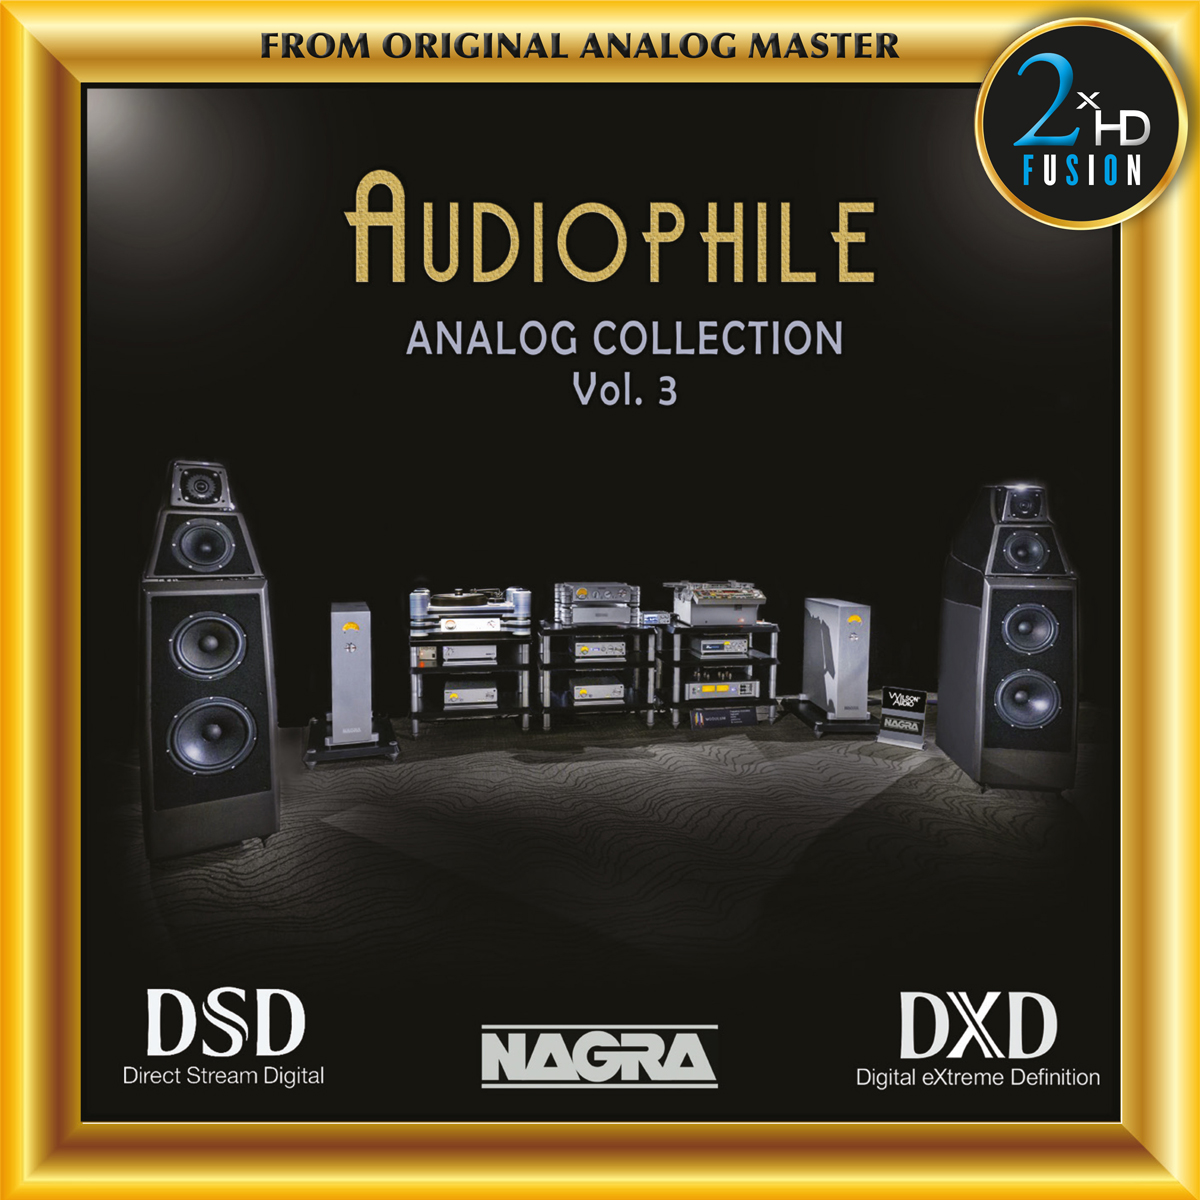 Audiophile Anolog Collection Vol. 3